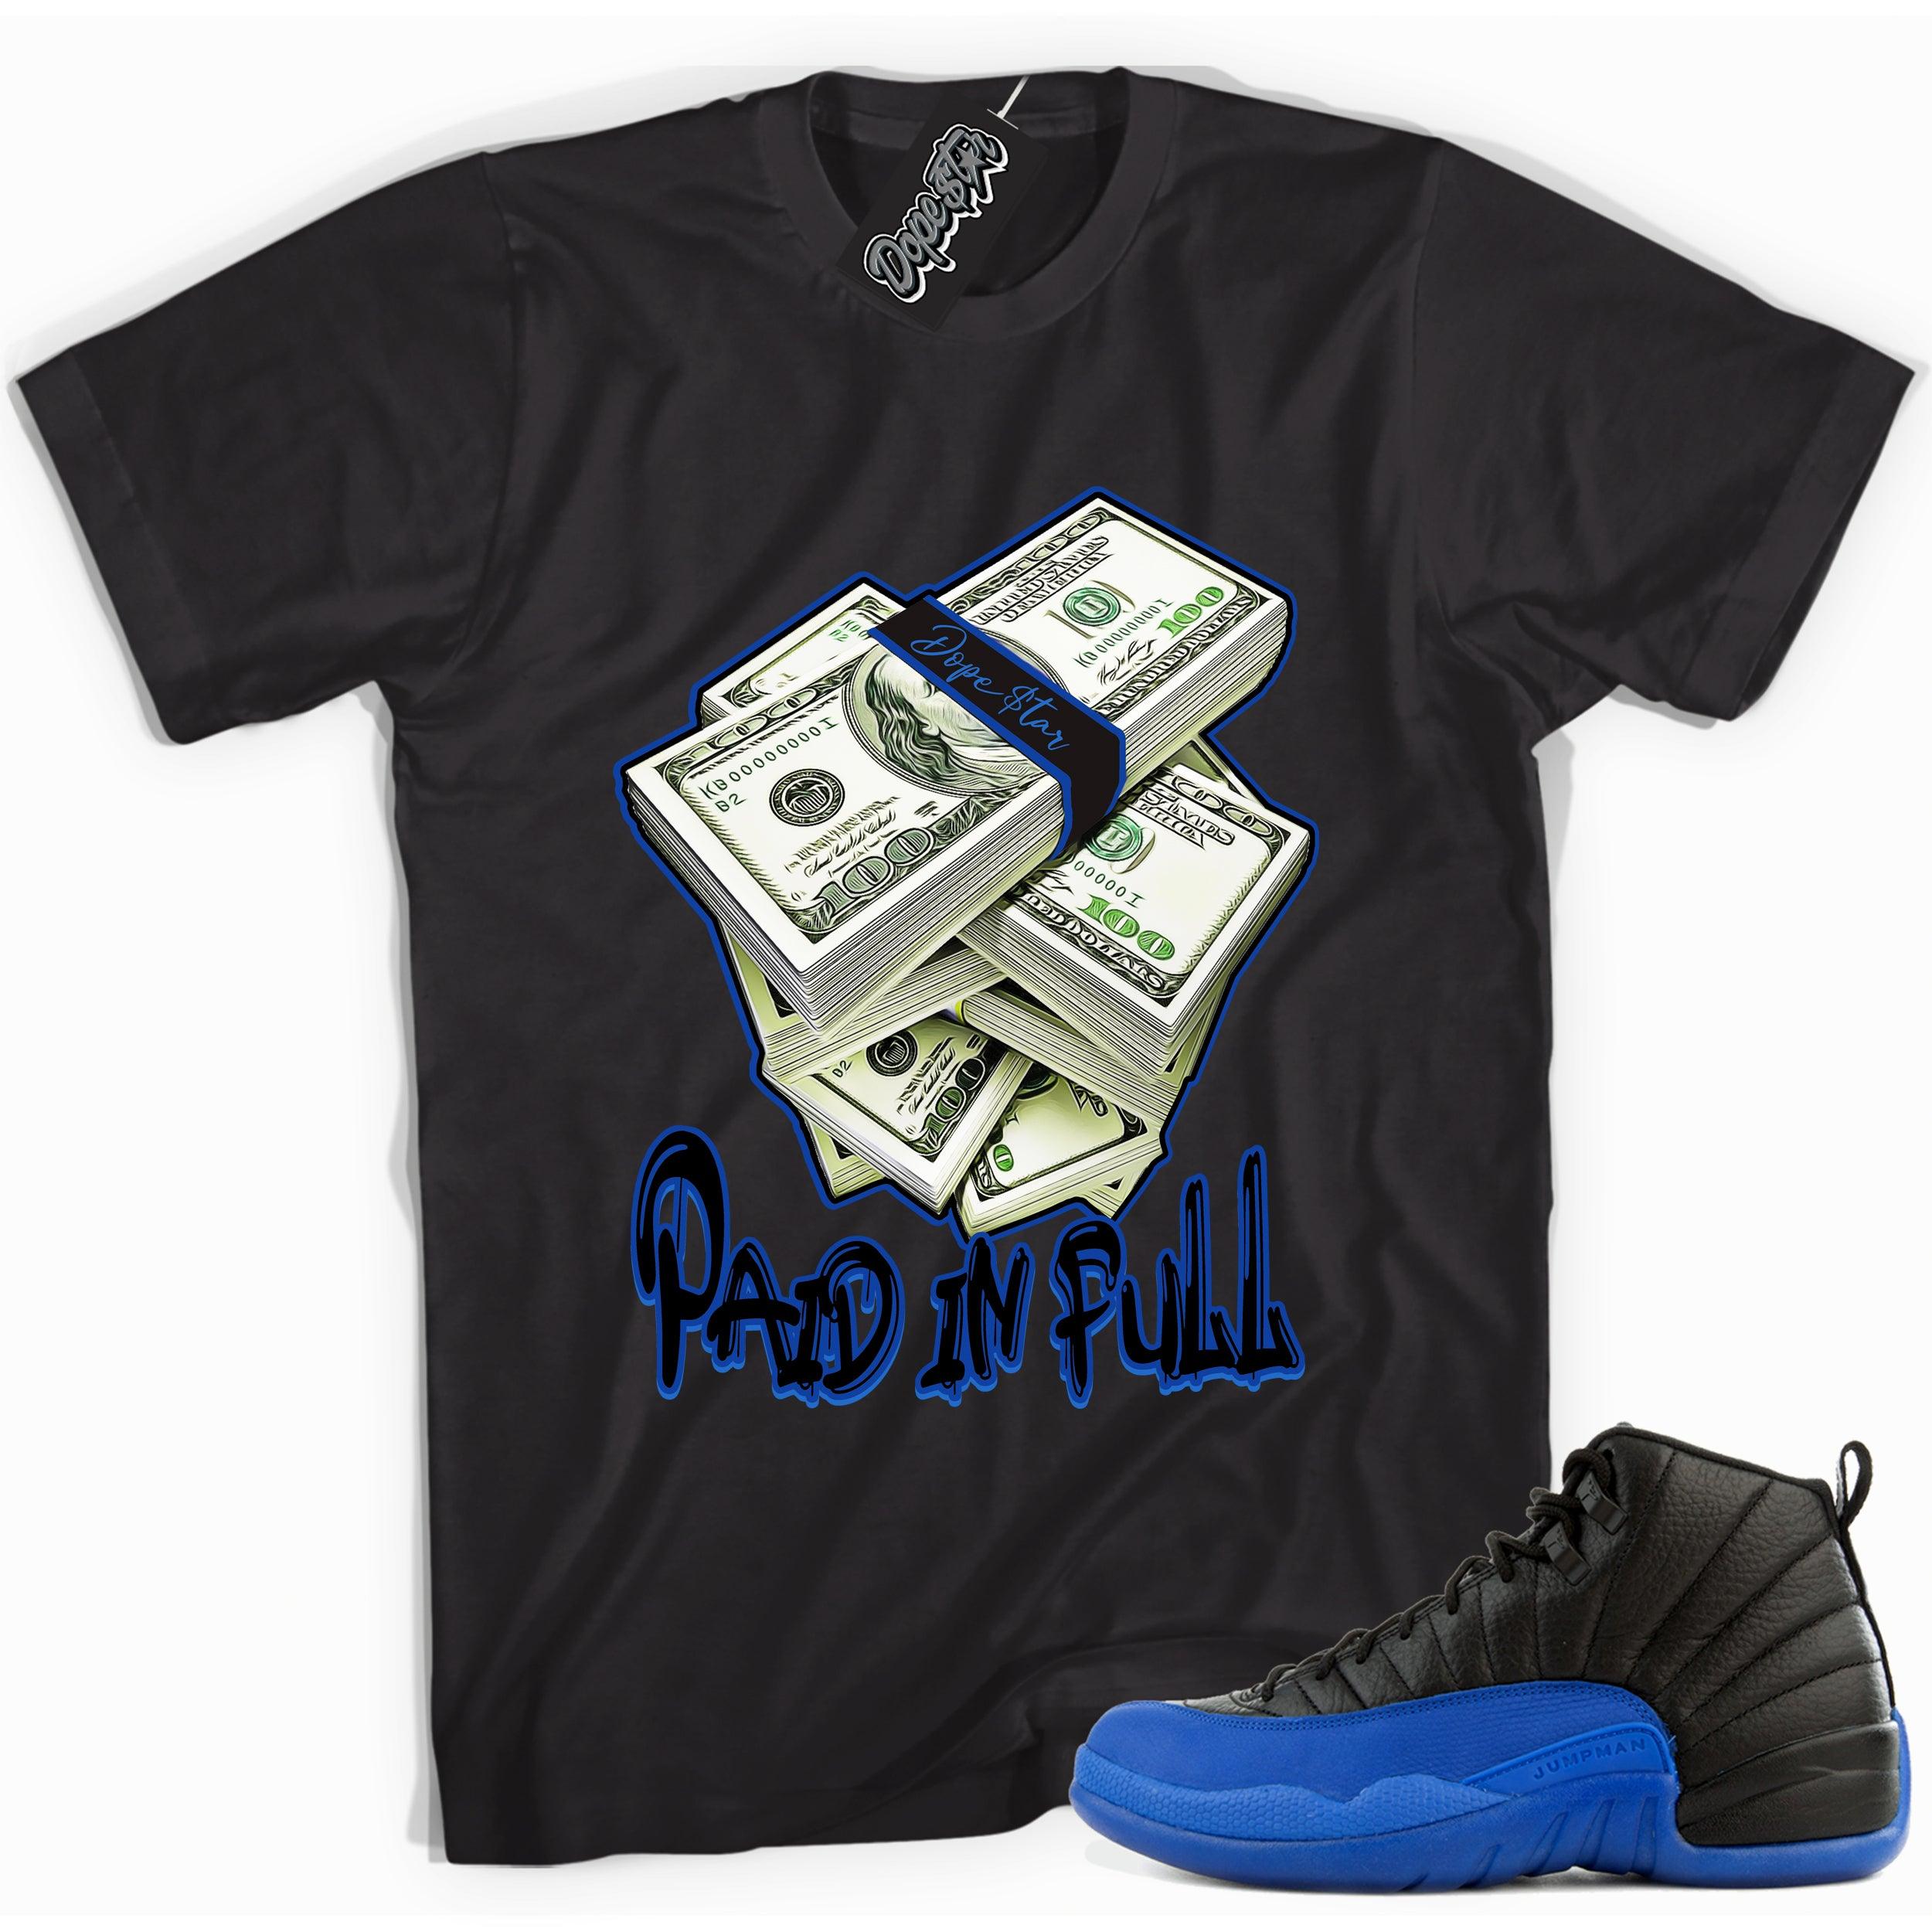 Cool black graphic tee with 'paid in full' print, that perfectly matches  Air Jordan 12 Retro Black Game Royal sneakers.